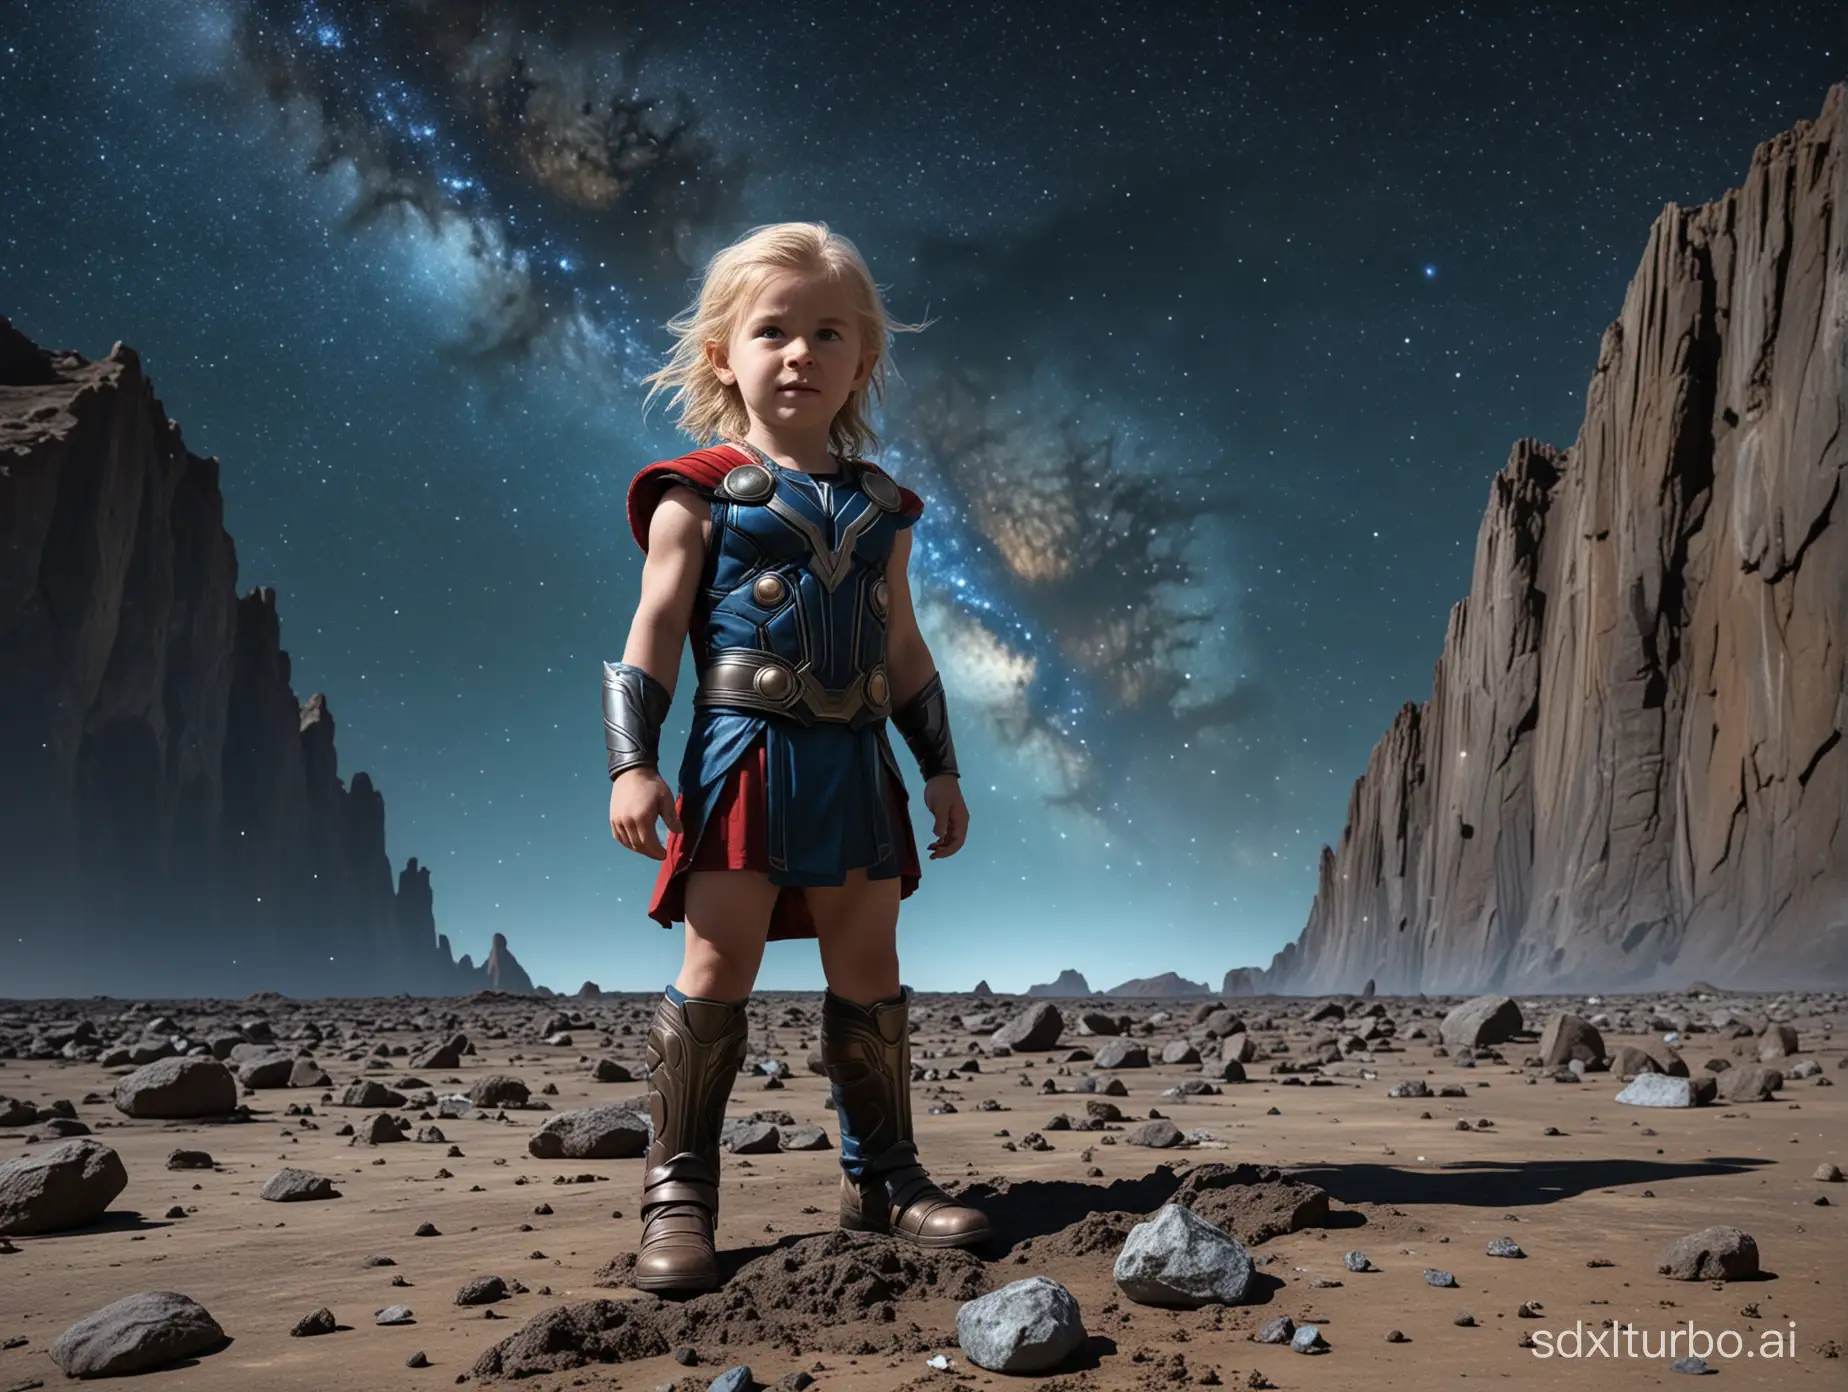 A child, full body, facing the camera, able to see the facial features and hair, transforms into Thor, the god of thunder, standing on the surface of a lunar meteorite, with a blue Earth in the background, the Milky Way galaxy appearing faintly.